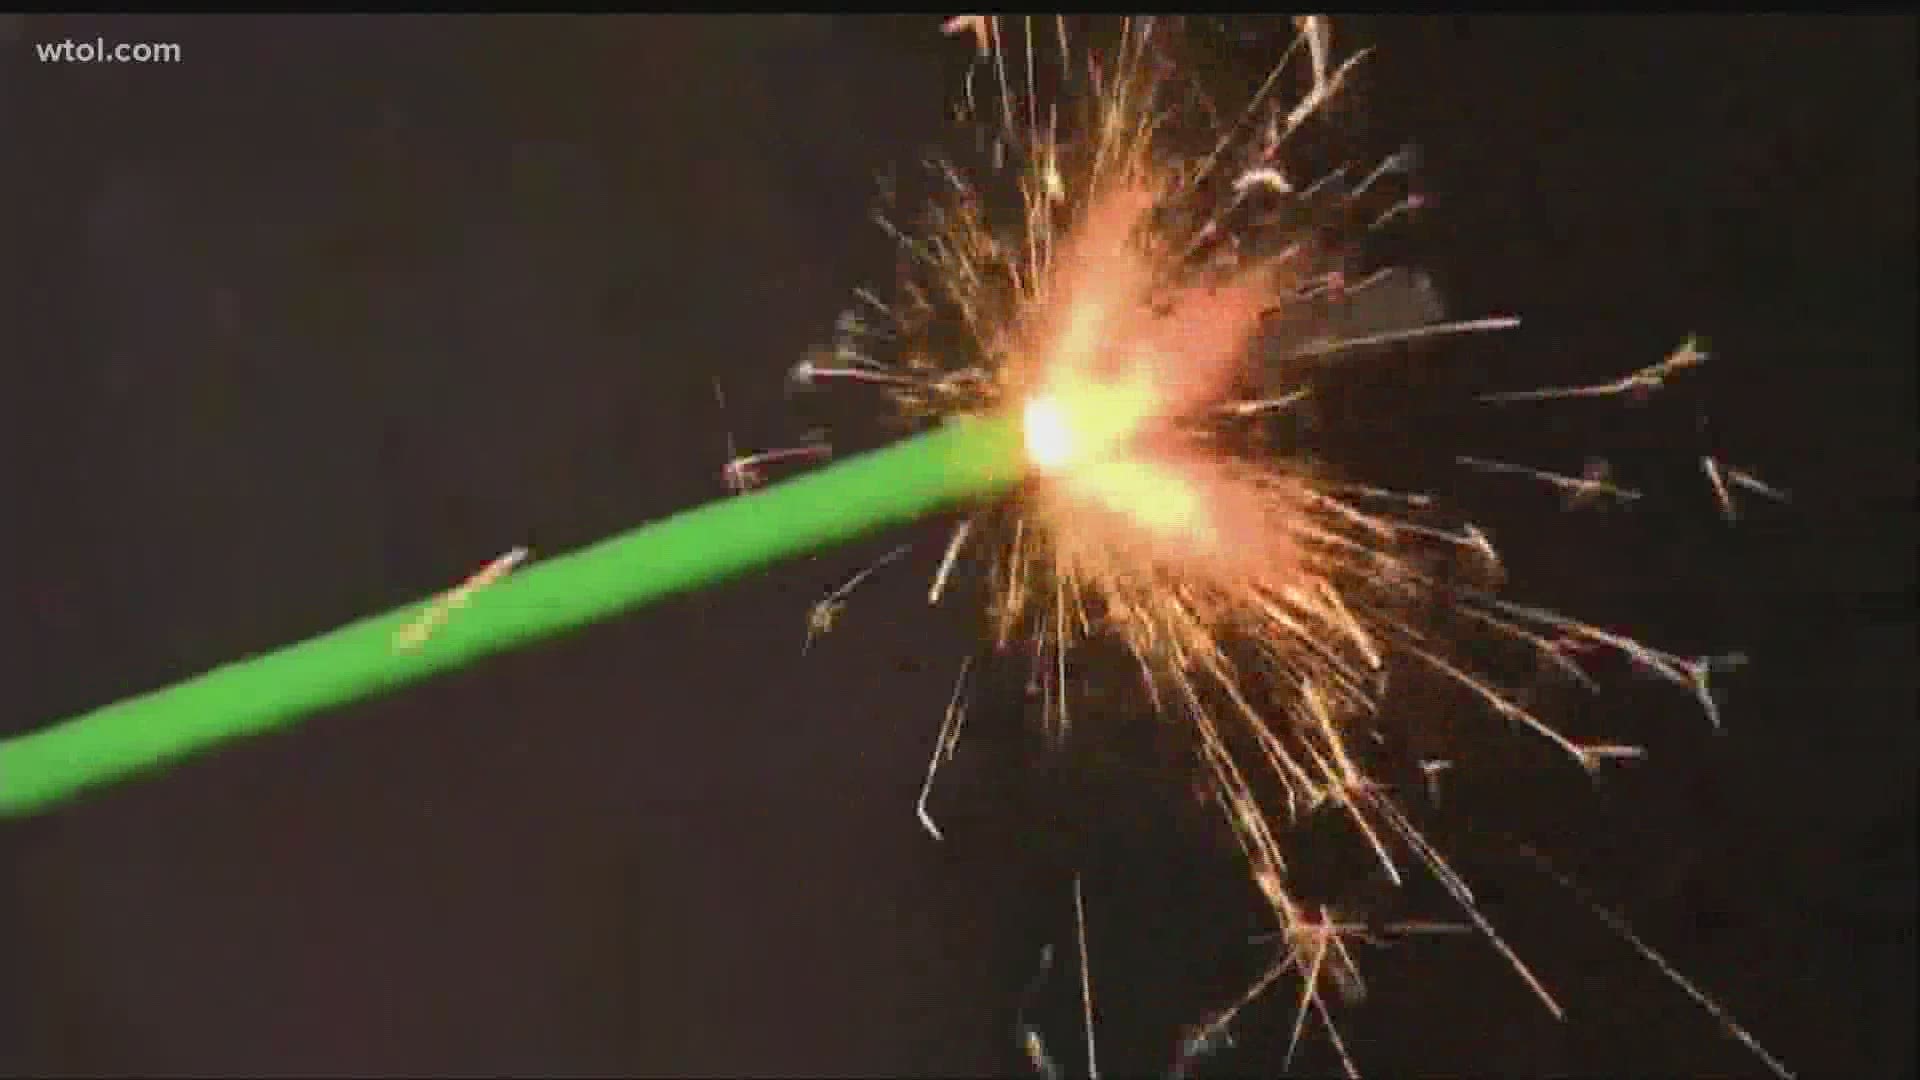 Fireworks are a favorite tradition for the Fourth of July, but in the wrong hands, they're also an injury waiting to happen.